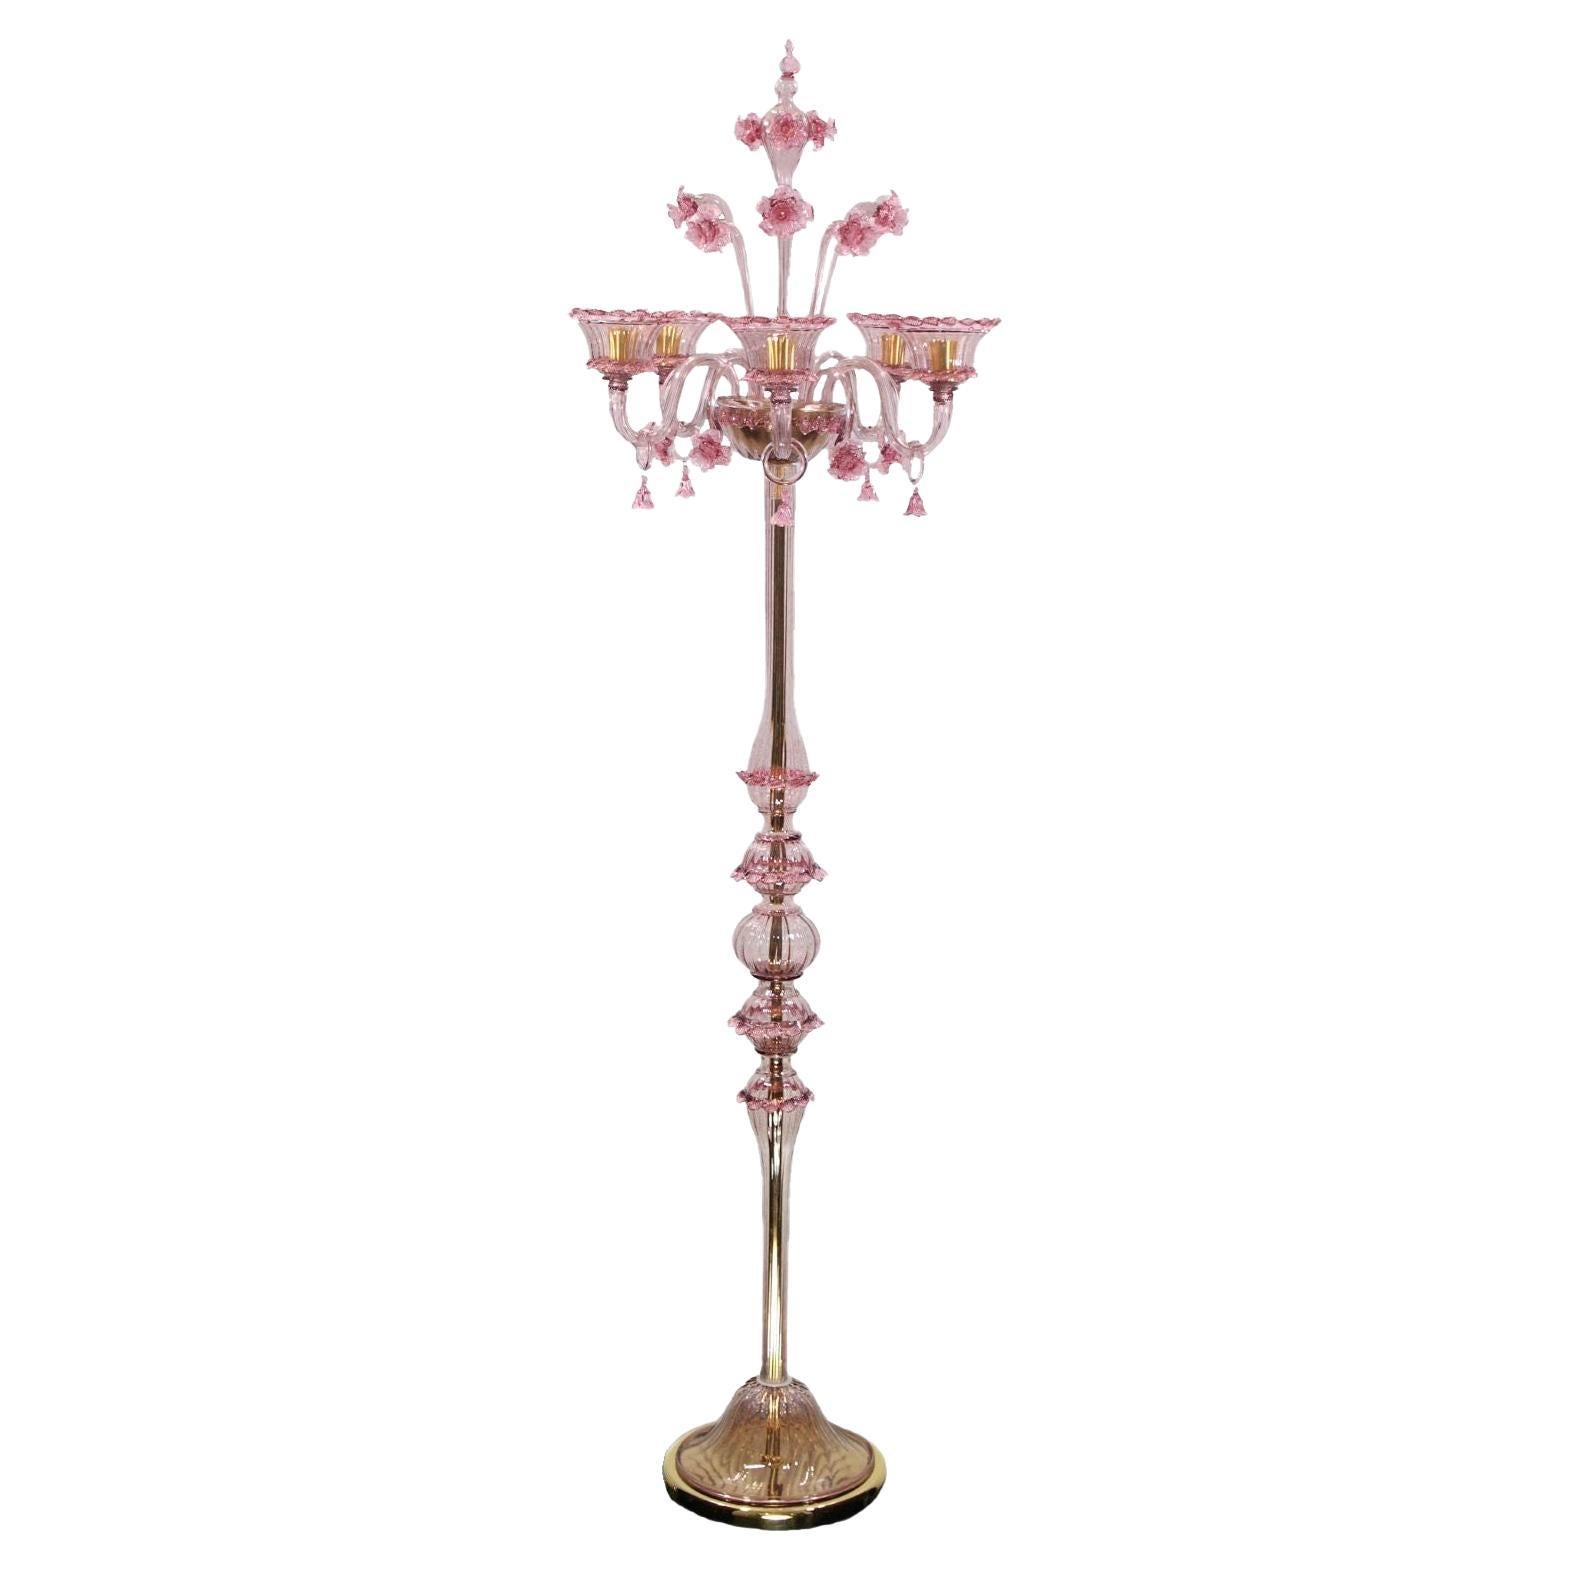 Artistic Floor Lamp 5 Arms Amethyst Murano Glass, Pink Details by Multiforme